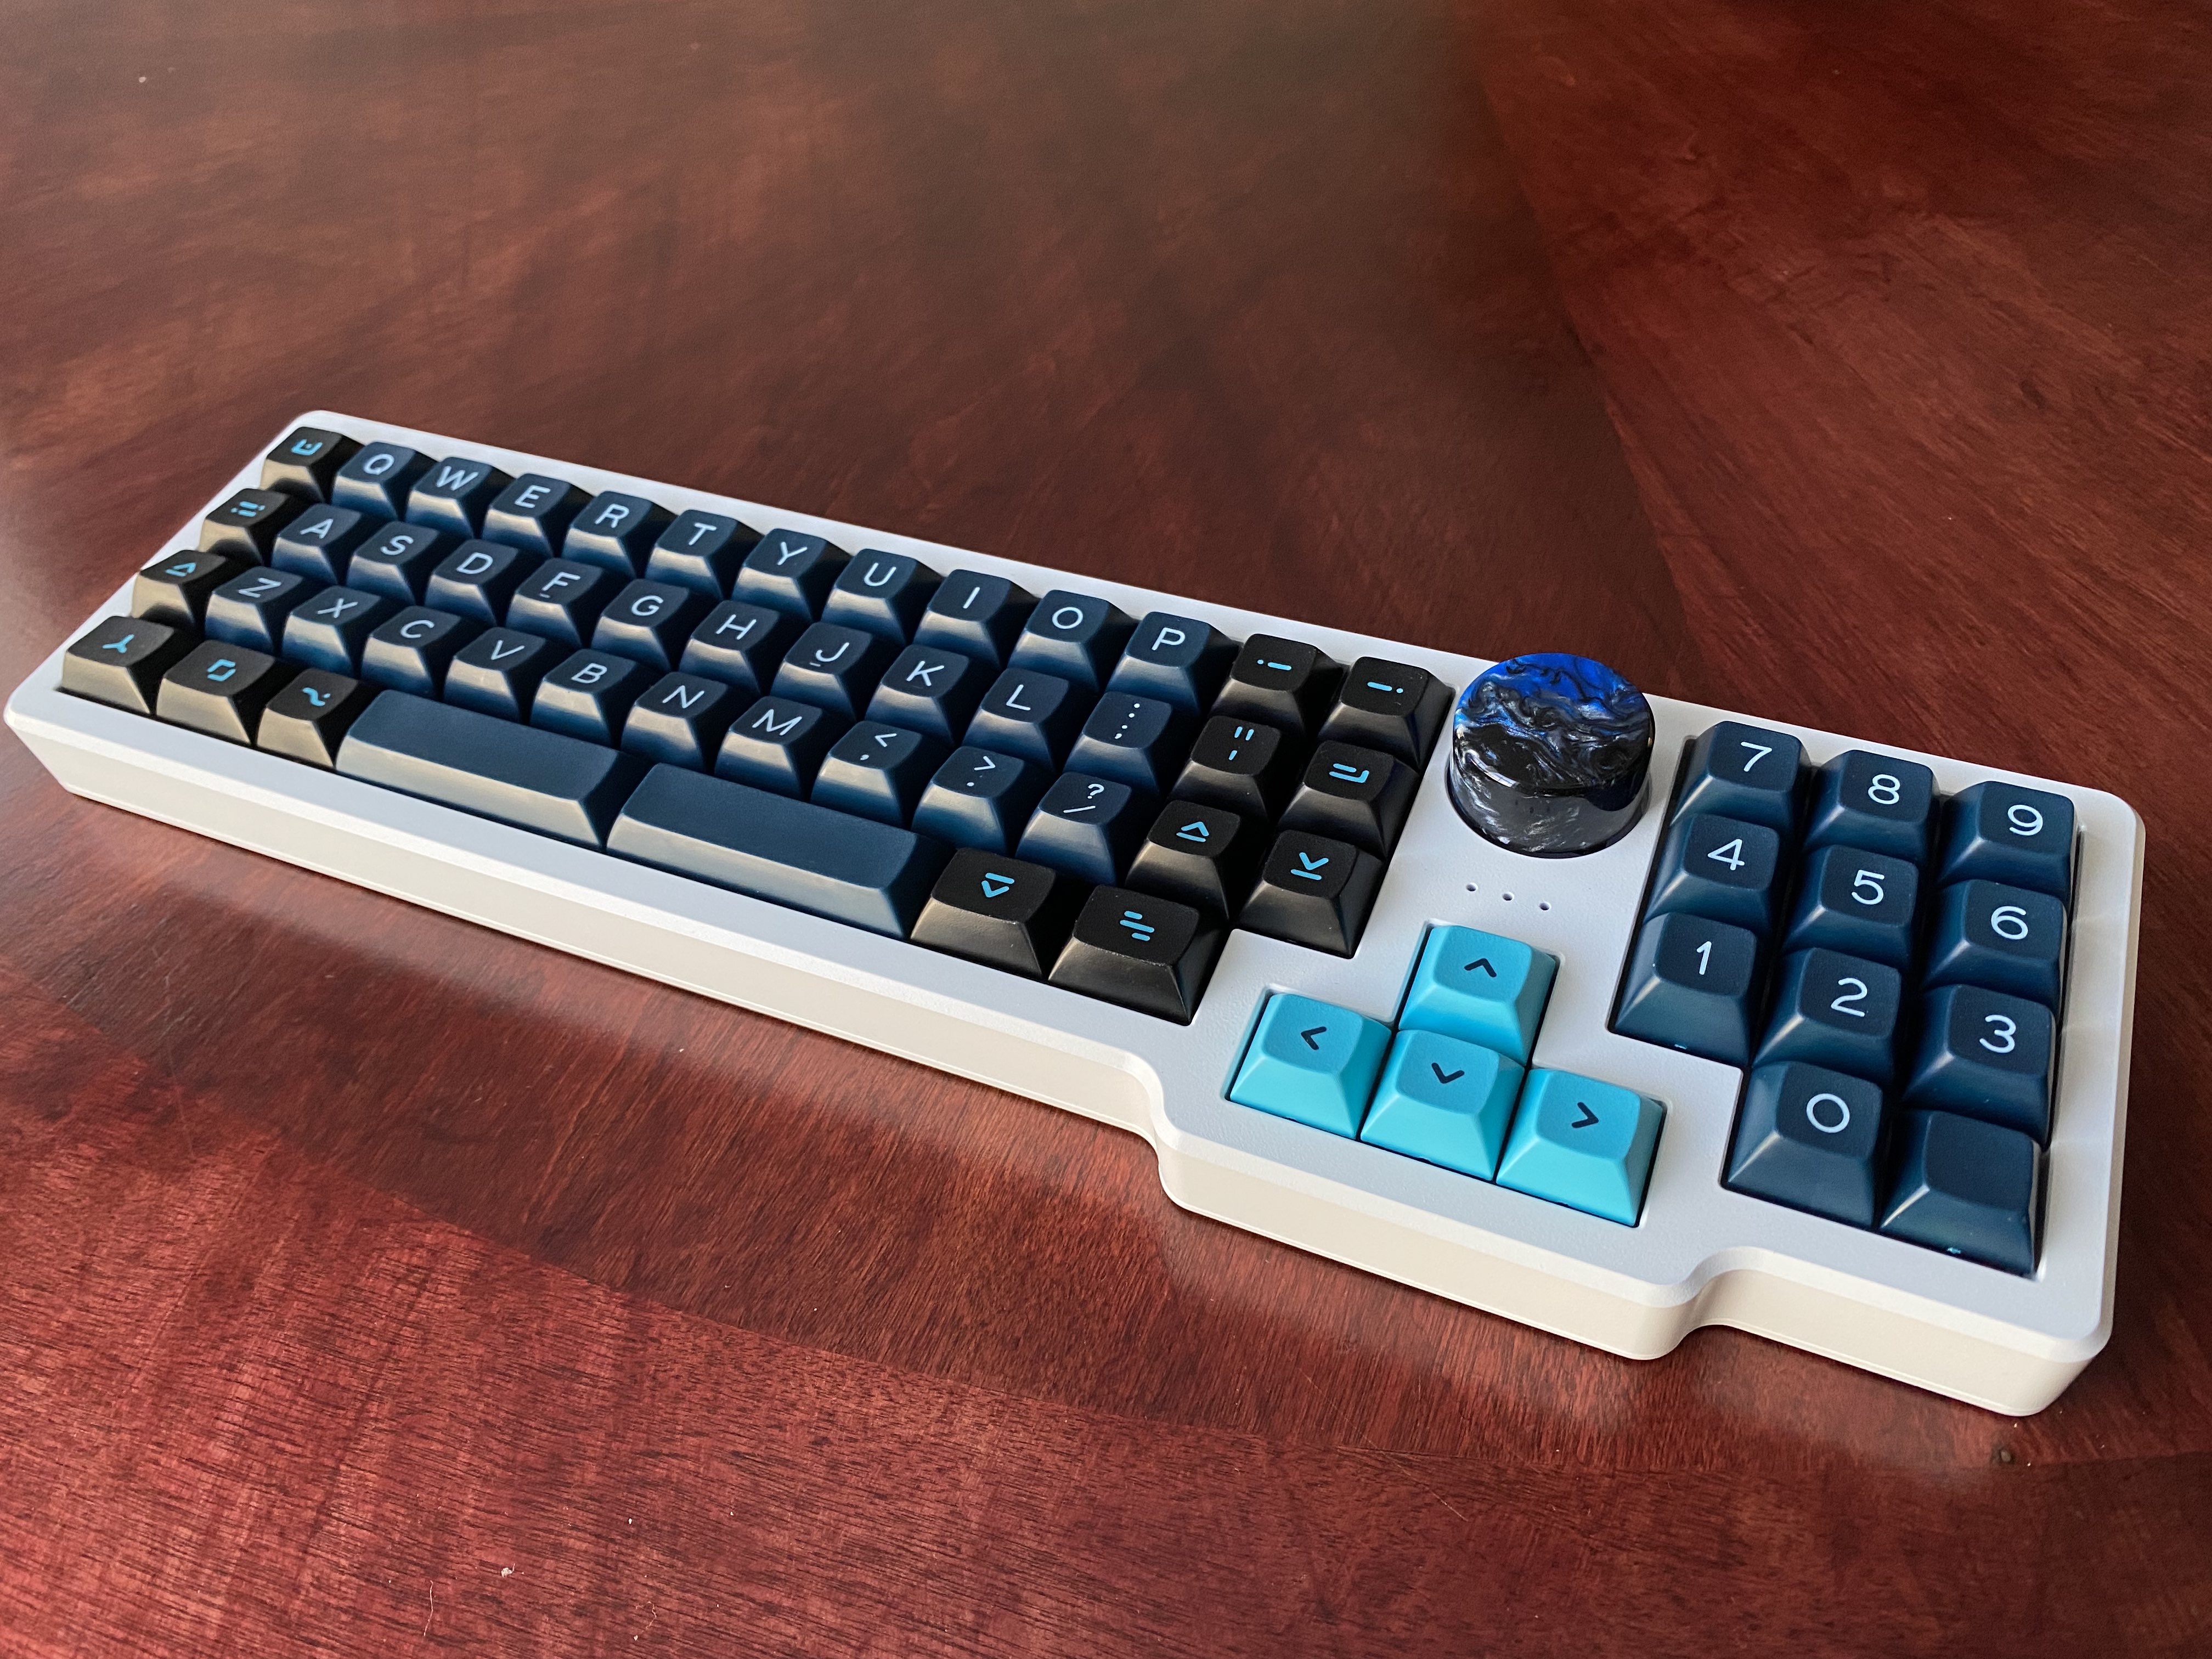 A white cerakoted Garbage Truck with a gORTHage Truck PCB, DSS Solarized Dark keycaps, and custom resin knob